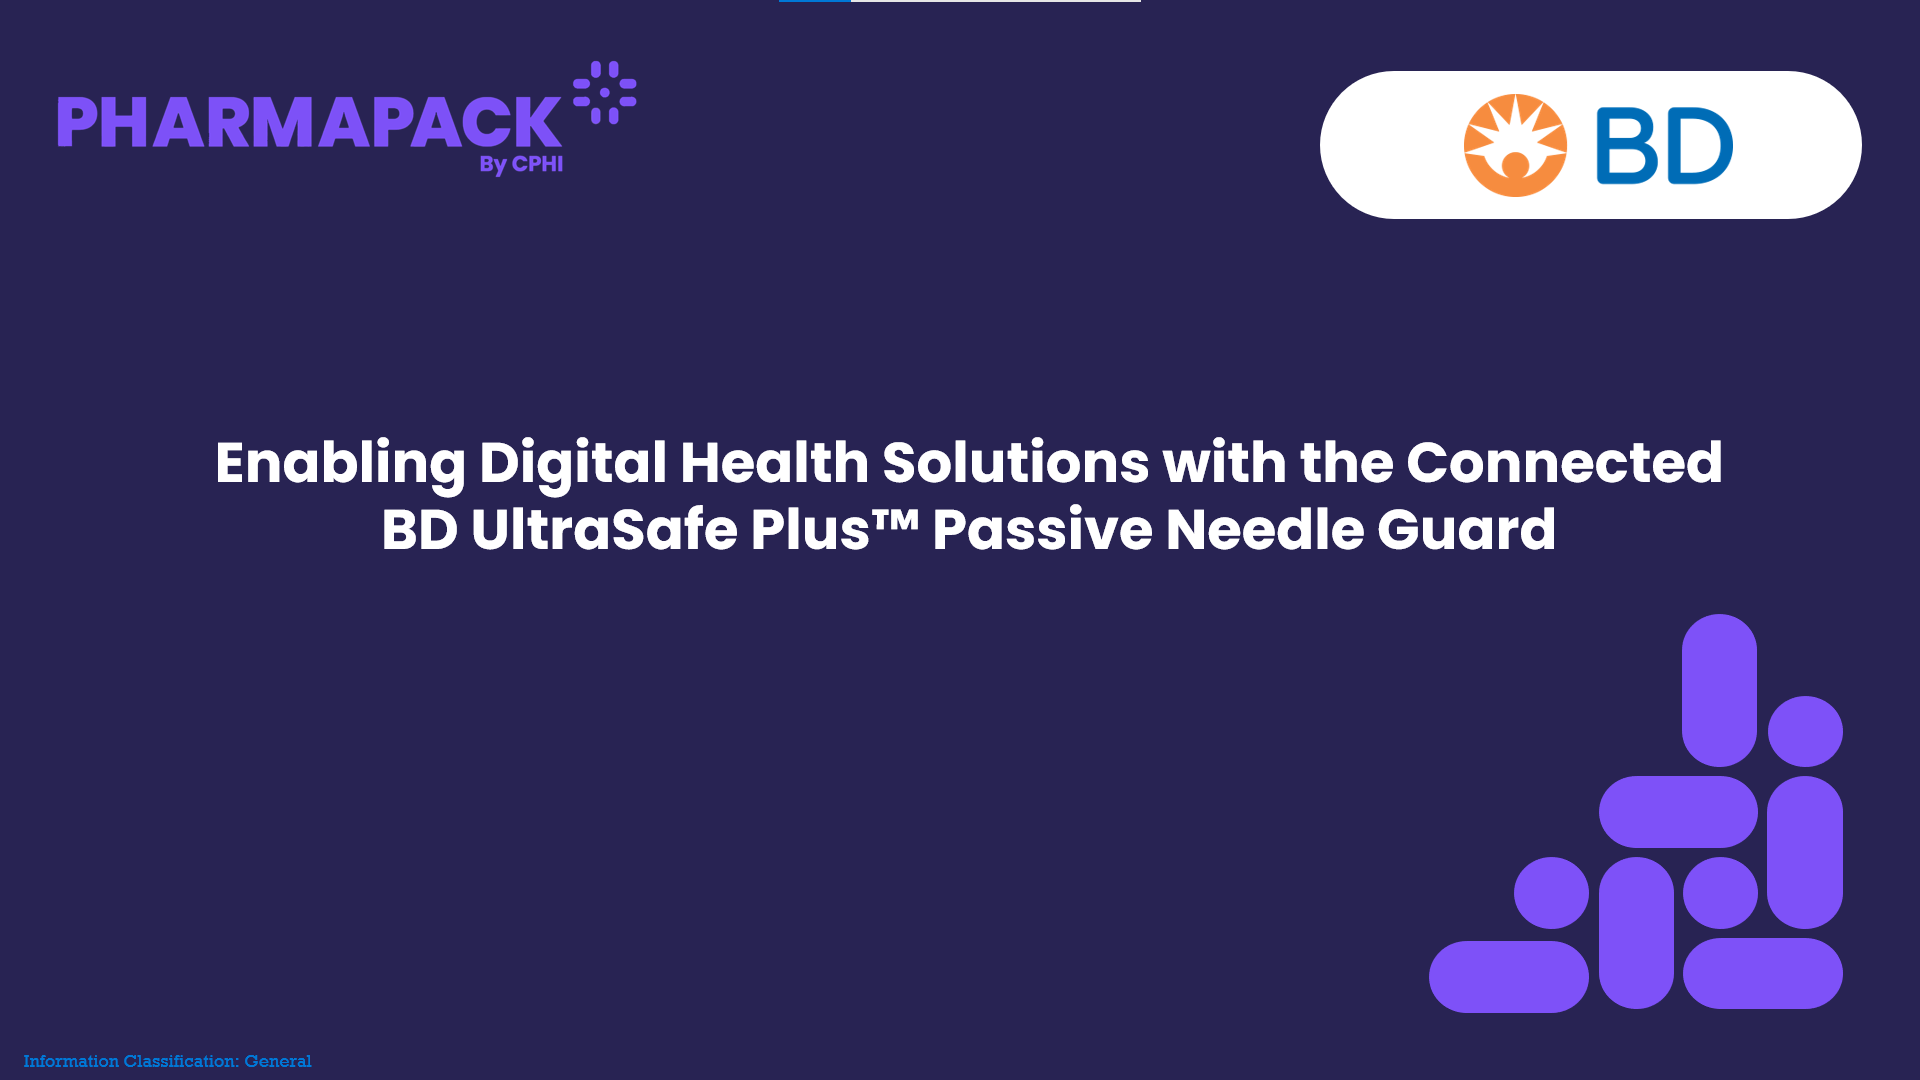 Enabling Digital Health Solutions with the Connected BD UltraSafe Plus™ Passive Needle Guard